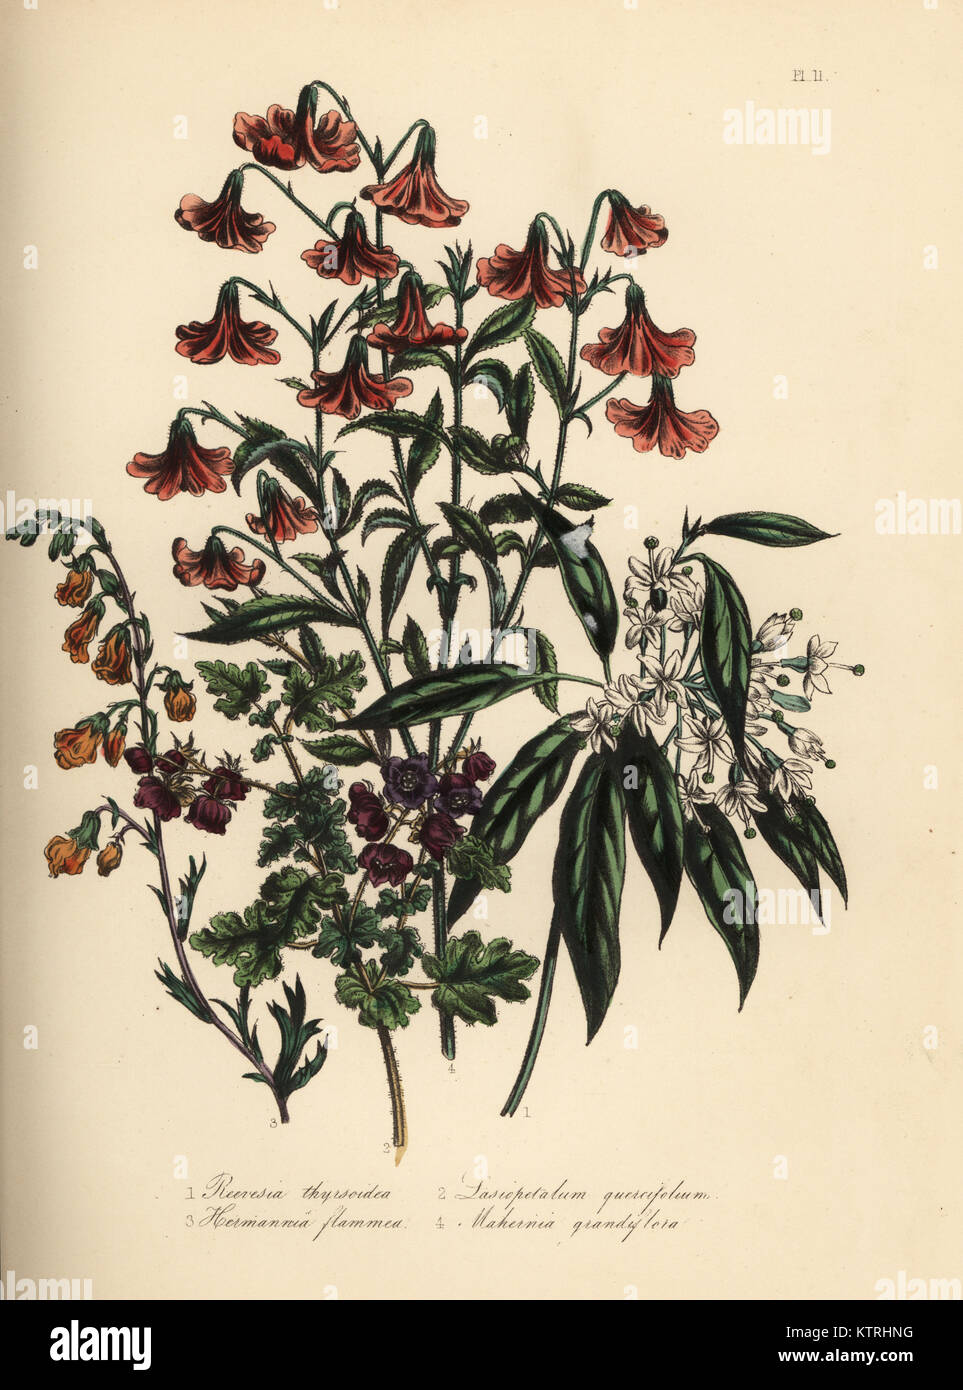 Thyrse-flowered reevesia, Reevesia thyrsoidea, oak-leaved lasiopetalum, Lasiopetalum quercifolium, flame-coloured hermannia, Hermannia flammea, and large-flowered mahernia, Mahernia grandiflora. Handfinished chromolithograph by Noel Humphreys after an illustration by Jane Loudon from Mrs. Jane Loudon's Ladies Flower Garden or Ornamental Greenhouse Plants, William S. Orr, London, 1849. Stock Photo